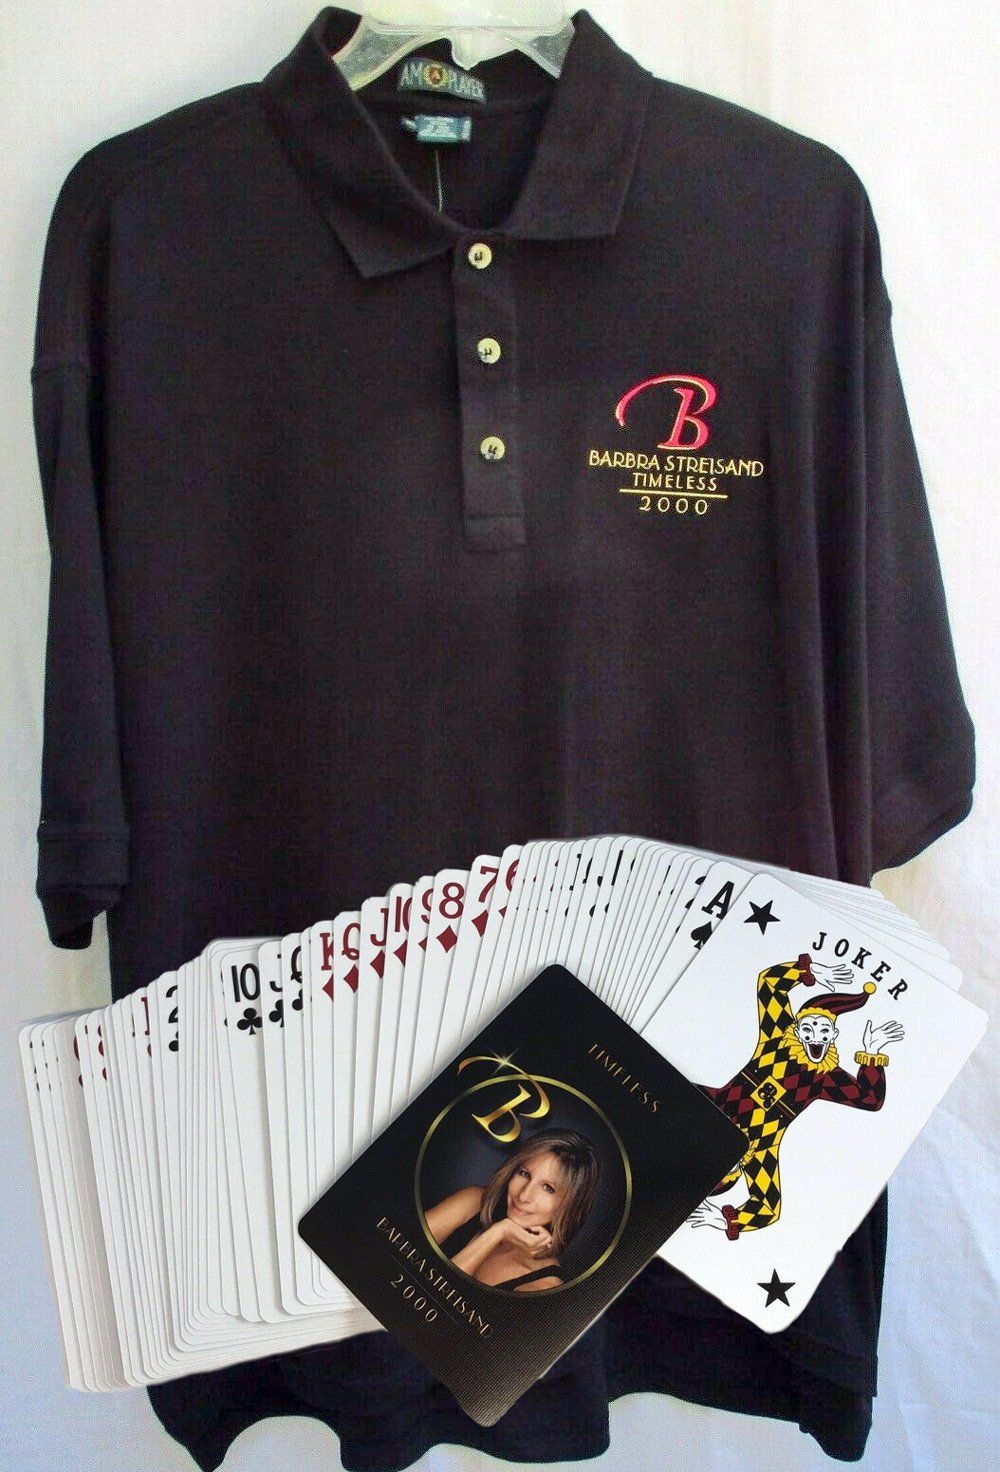 Streisand shirt and playing cards sold for Timeless.